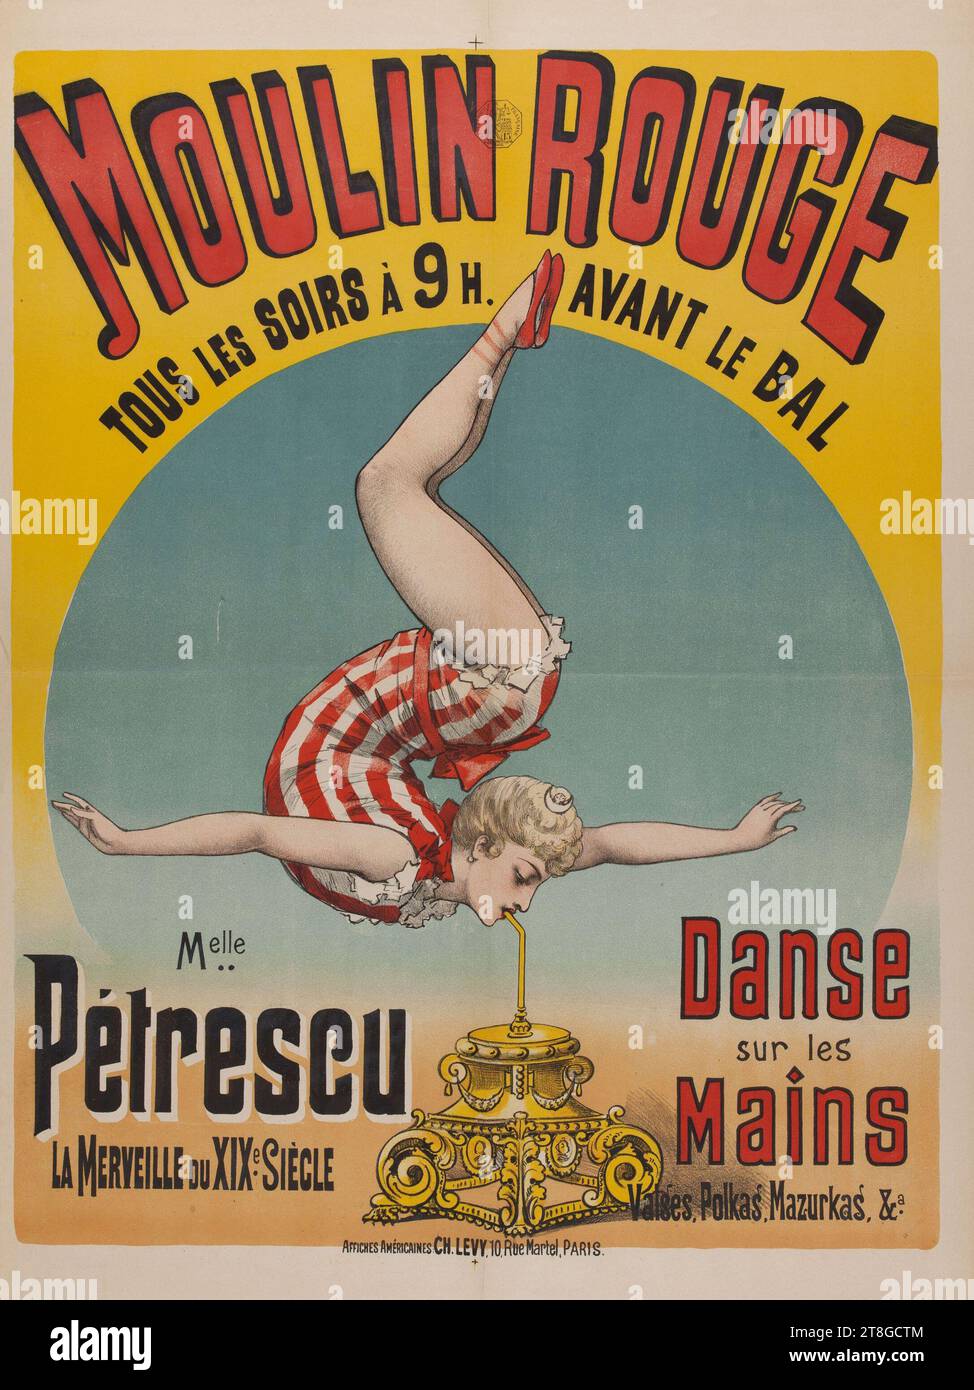 MOULIN ROUGE, EVERY EVENING AT 9. BEFORE THE BAL, Melle., Pétrescu, THE WONDER OF THE 19th century. CENTURY, Dance, on the, hands, Valses, Polkas, Mazurkas, &a., Designer, Lévy, Charles, Printer, After 1888, Graphic arts, Print, Poster, Lithography, Dimensions - Work: Height: 82 cm, Width: 61.2cm Stock Photo